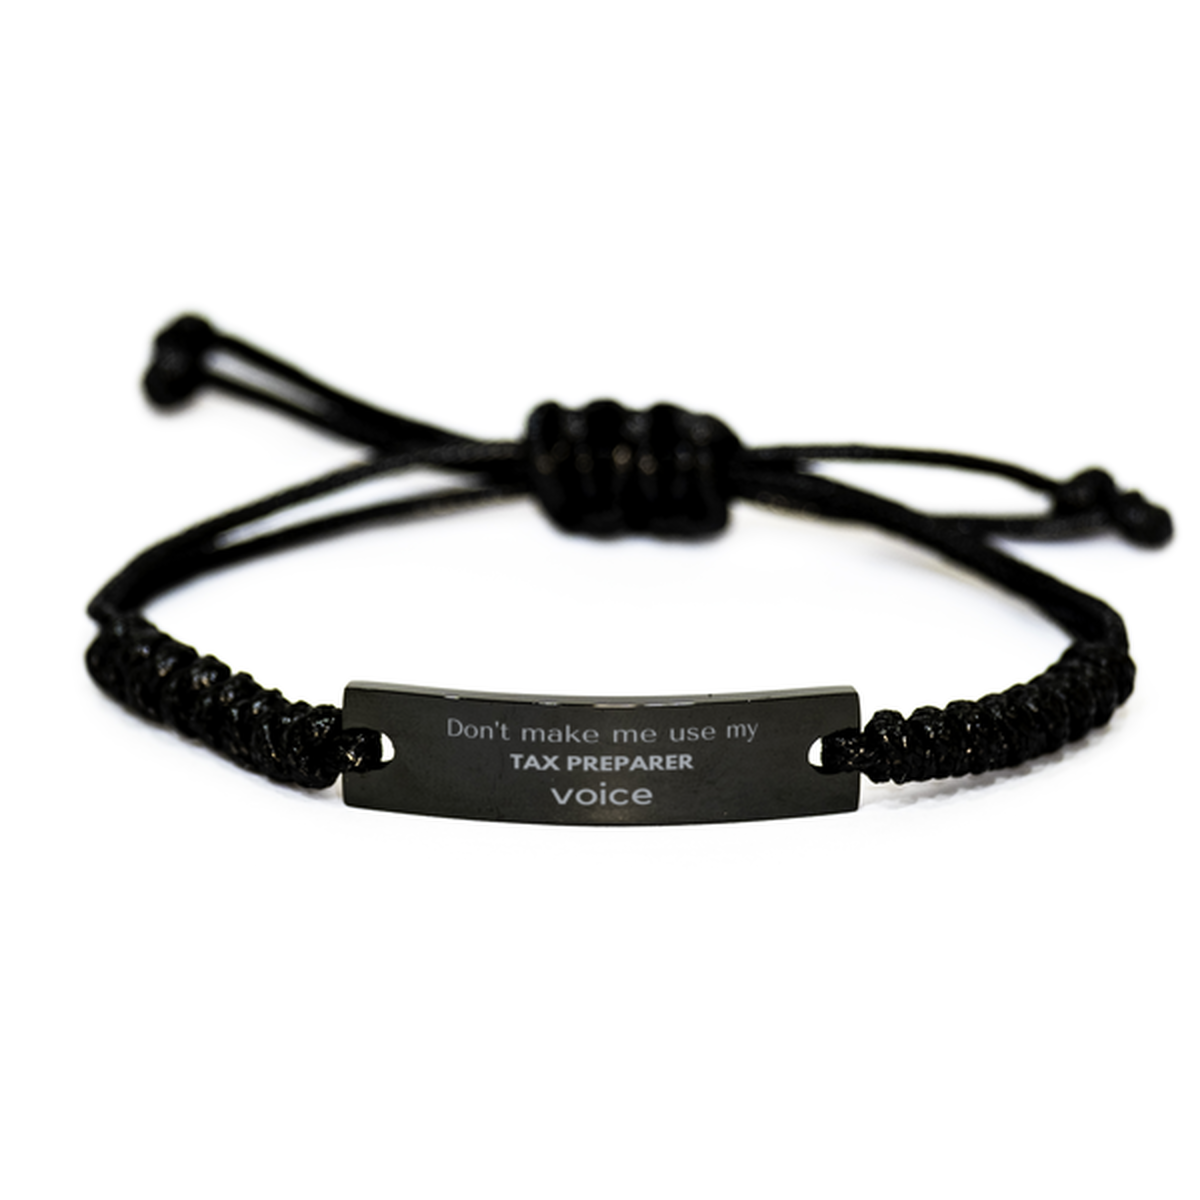 Don't make me use my Tax Preparer voice, Sarcasm Tax Preparer Gifts, Christmas Tax Preparer Black Rope Bracelet Birthday Unique Gifts For Tax Preparer Coworkers, Men, Women, Colleague, Friends